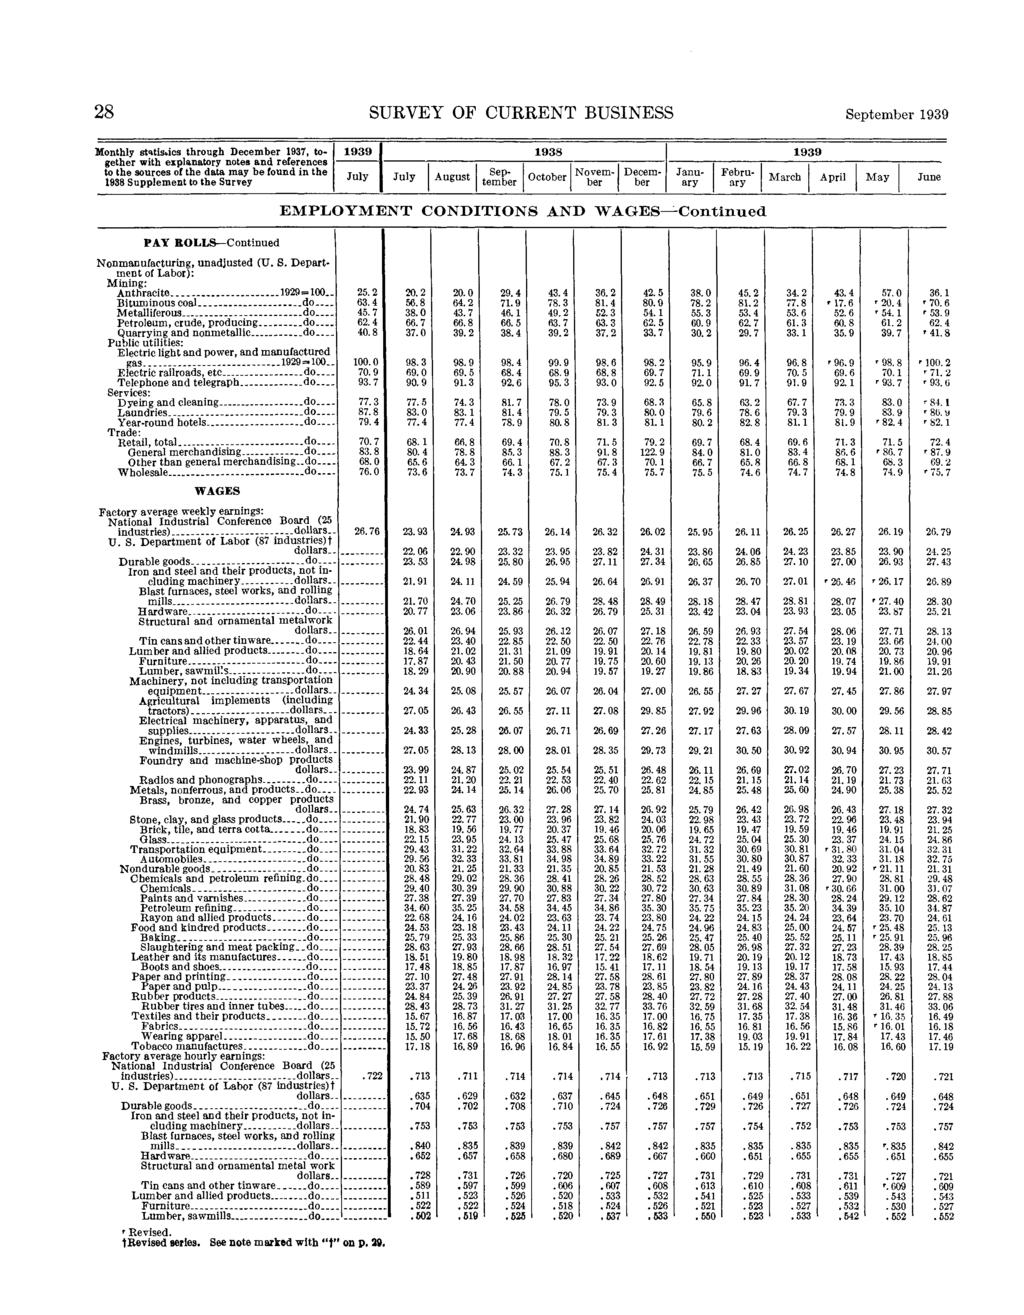 28 SURVEY OF CURRENT BUSINESS Monthly statistics through 1937, together Supplement to the Survey EMPLOYMENT CONDITIONS AND WAGES Continued PAY ROLLS Continued Nonmanufacturing, unadjusted (U. S. Department of Labor): Mining: Anthracite 19=1.